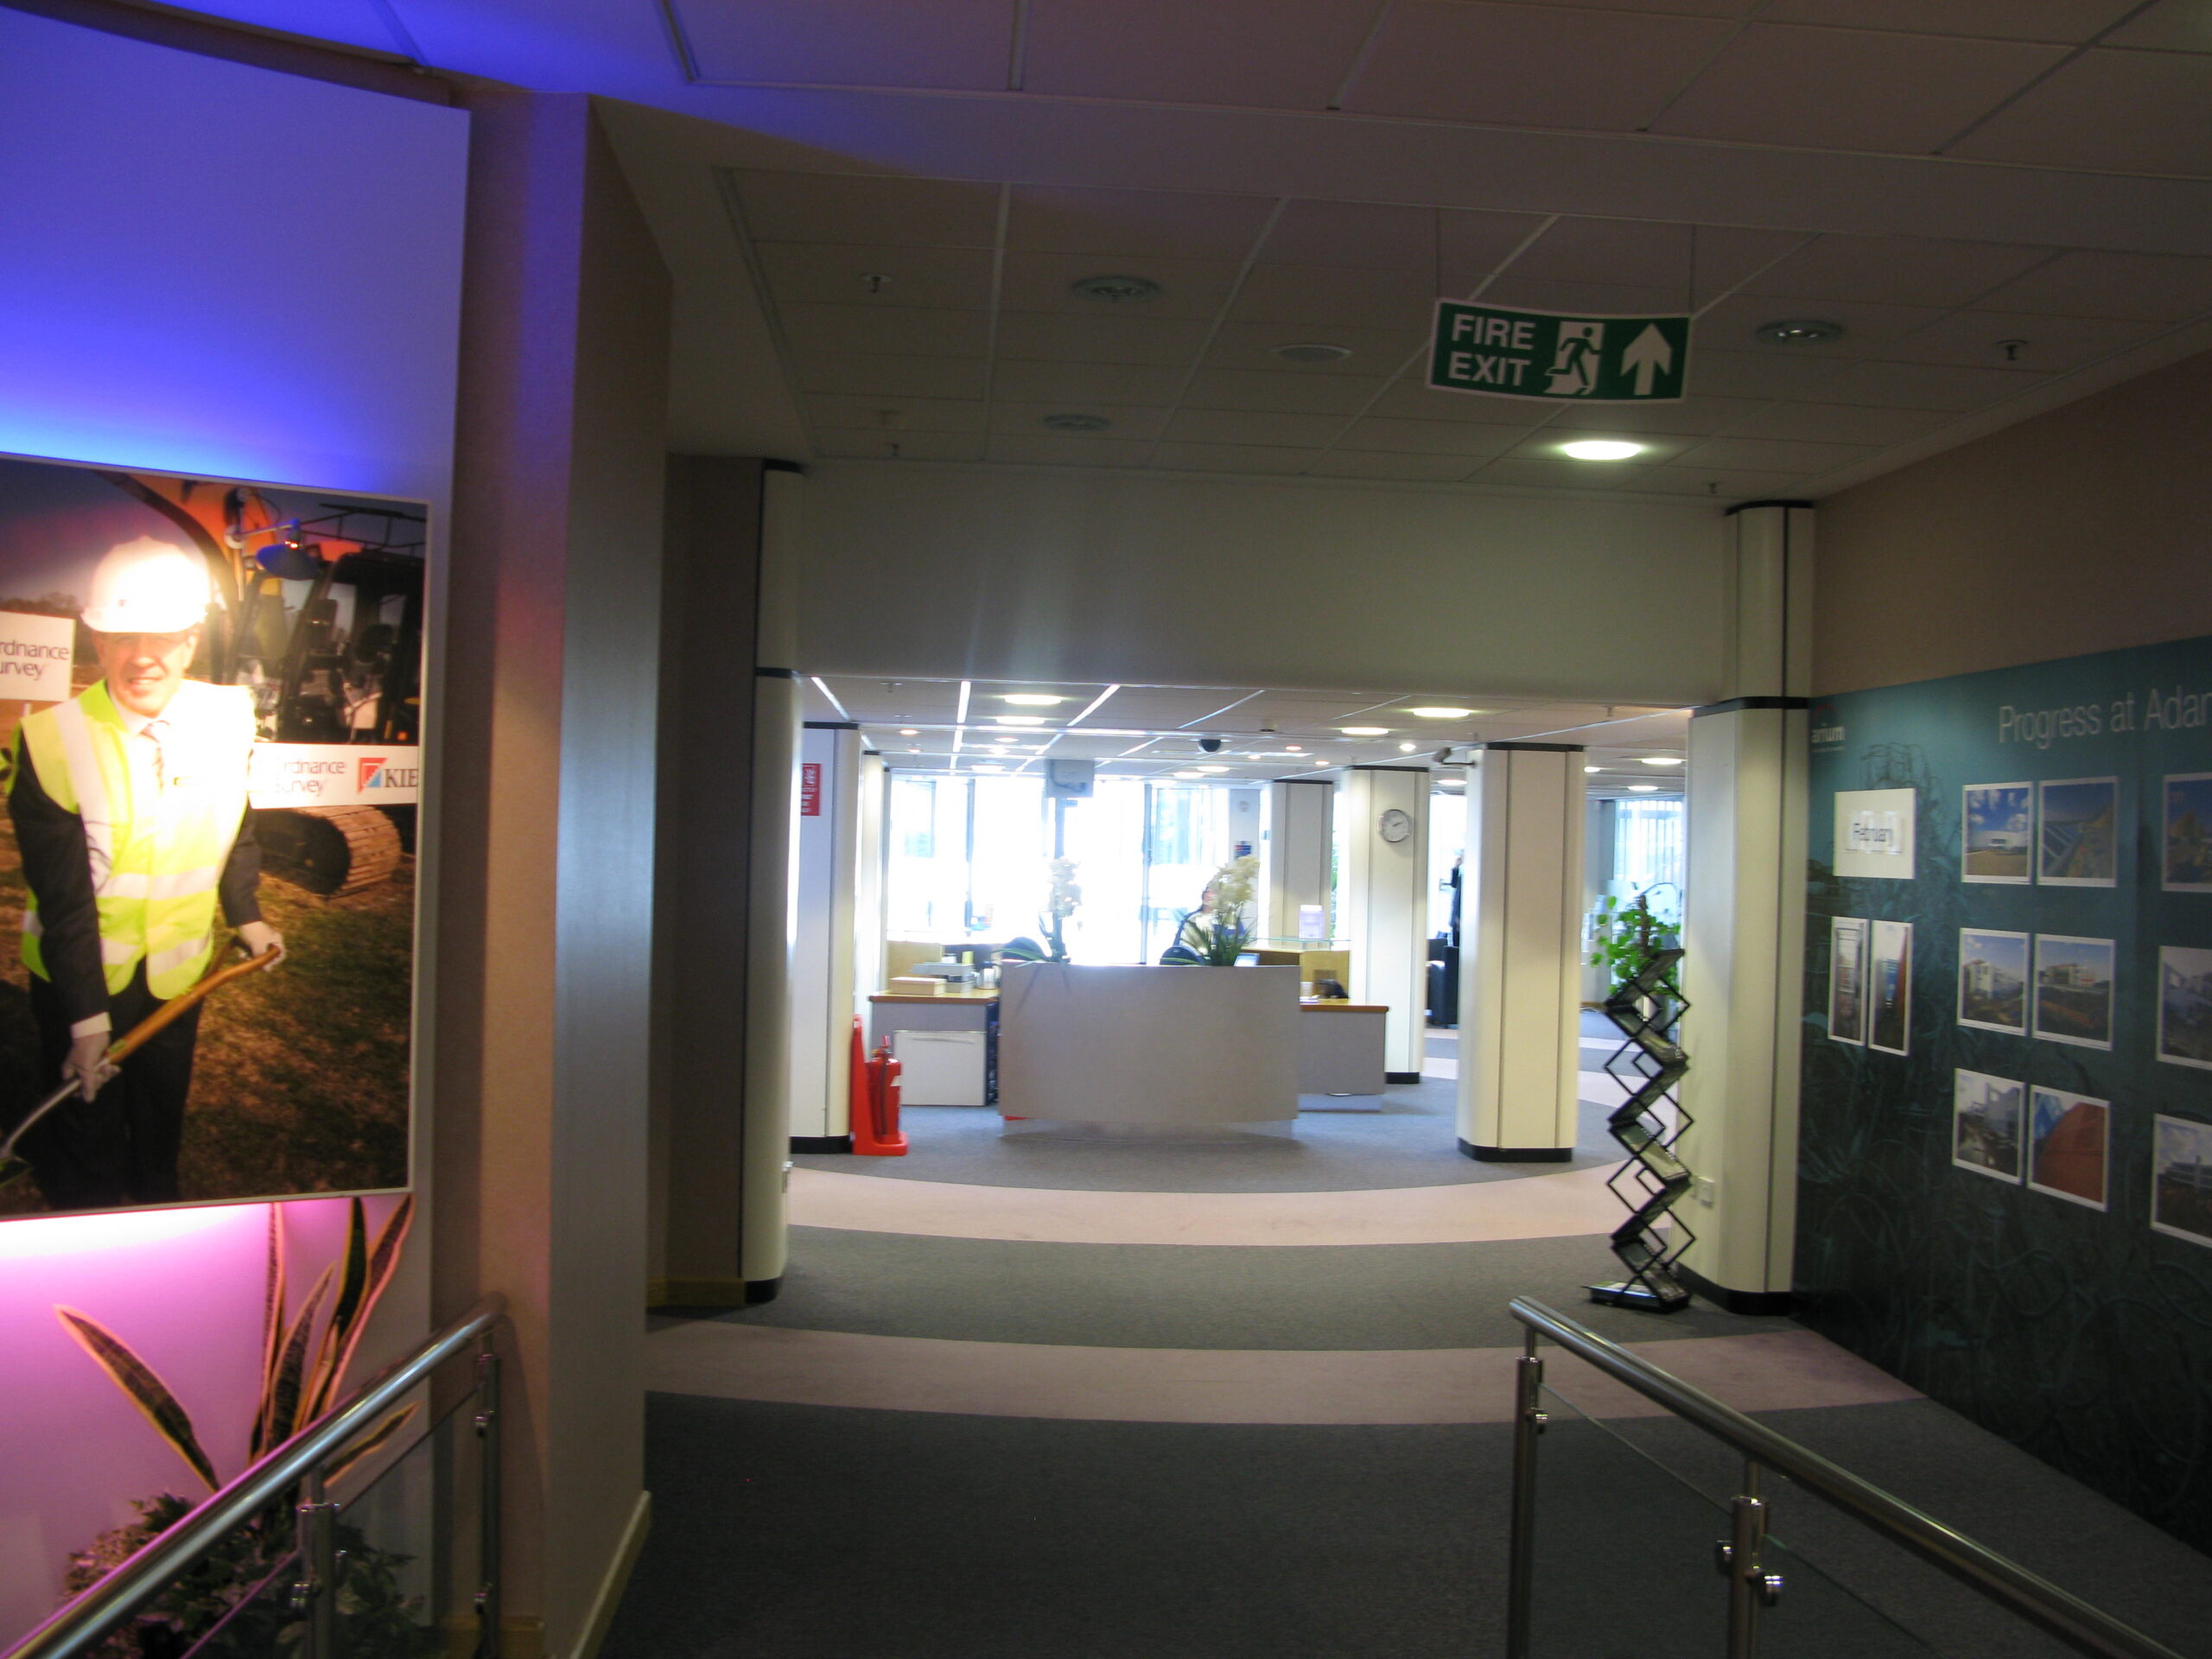 Facing towards Reception from the Business Centre waiting area.